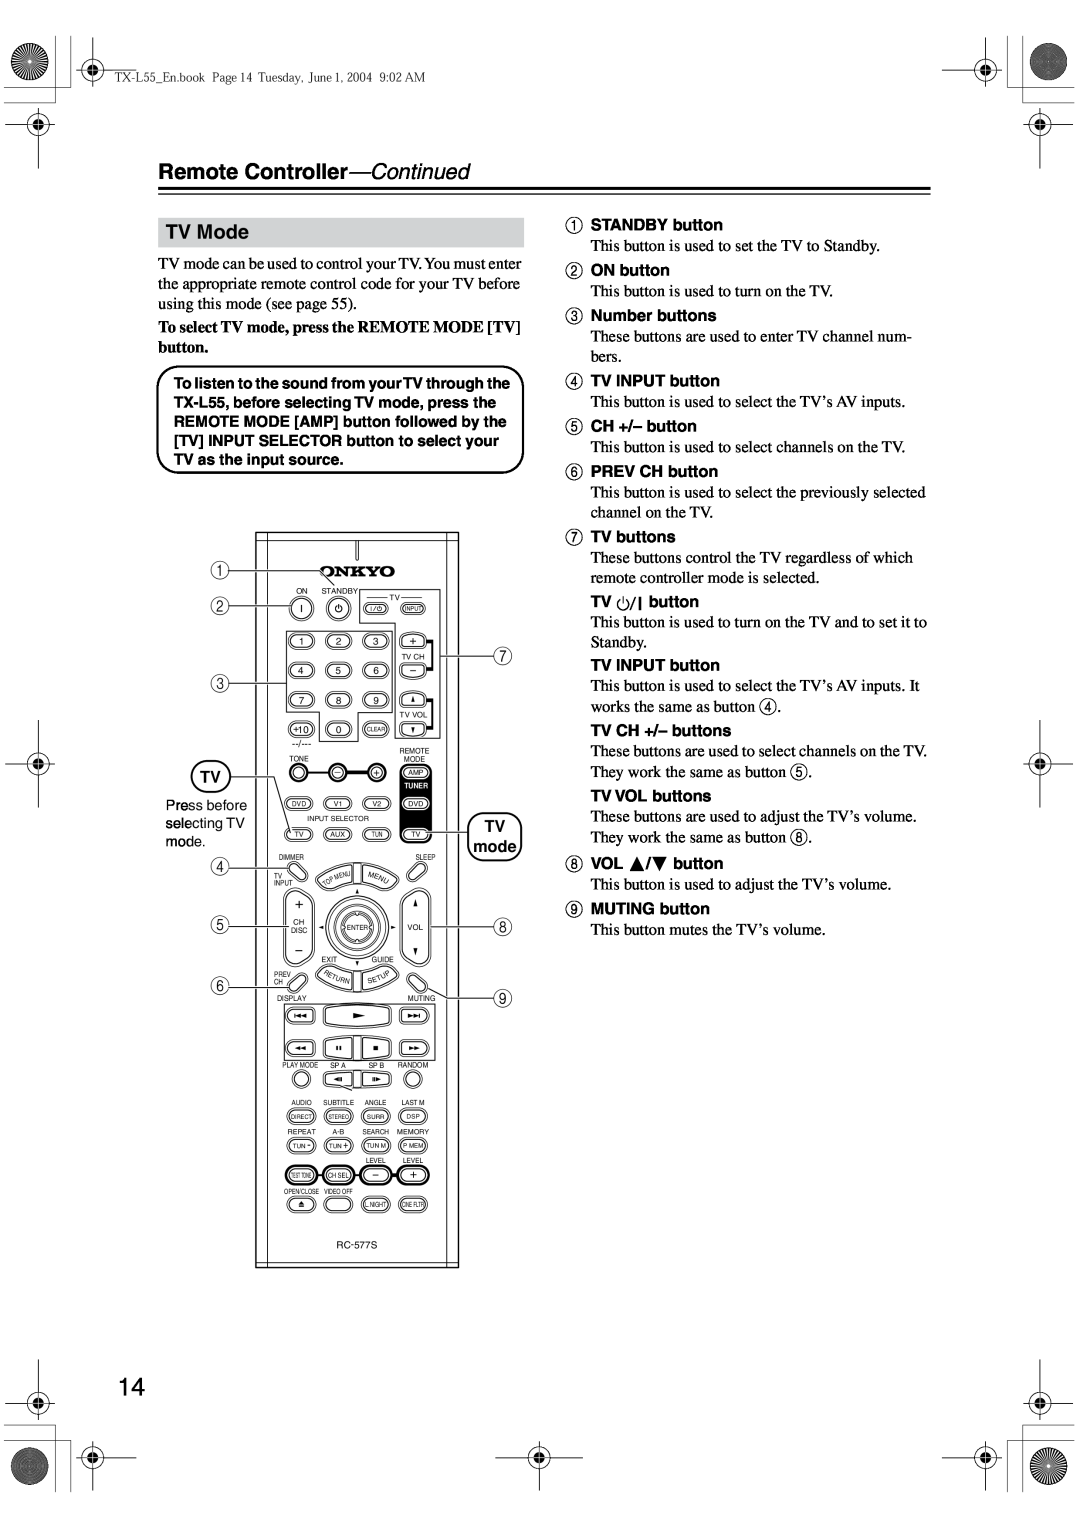 Onkyo TX-L55 instruction manual Remote Controller-Continued, TV Mode 